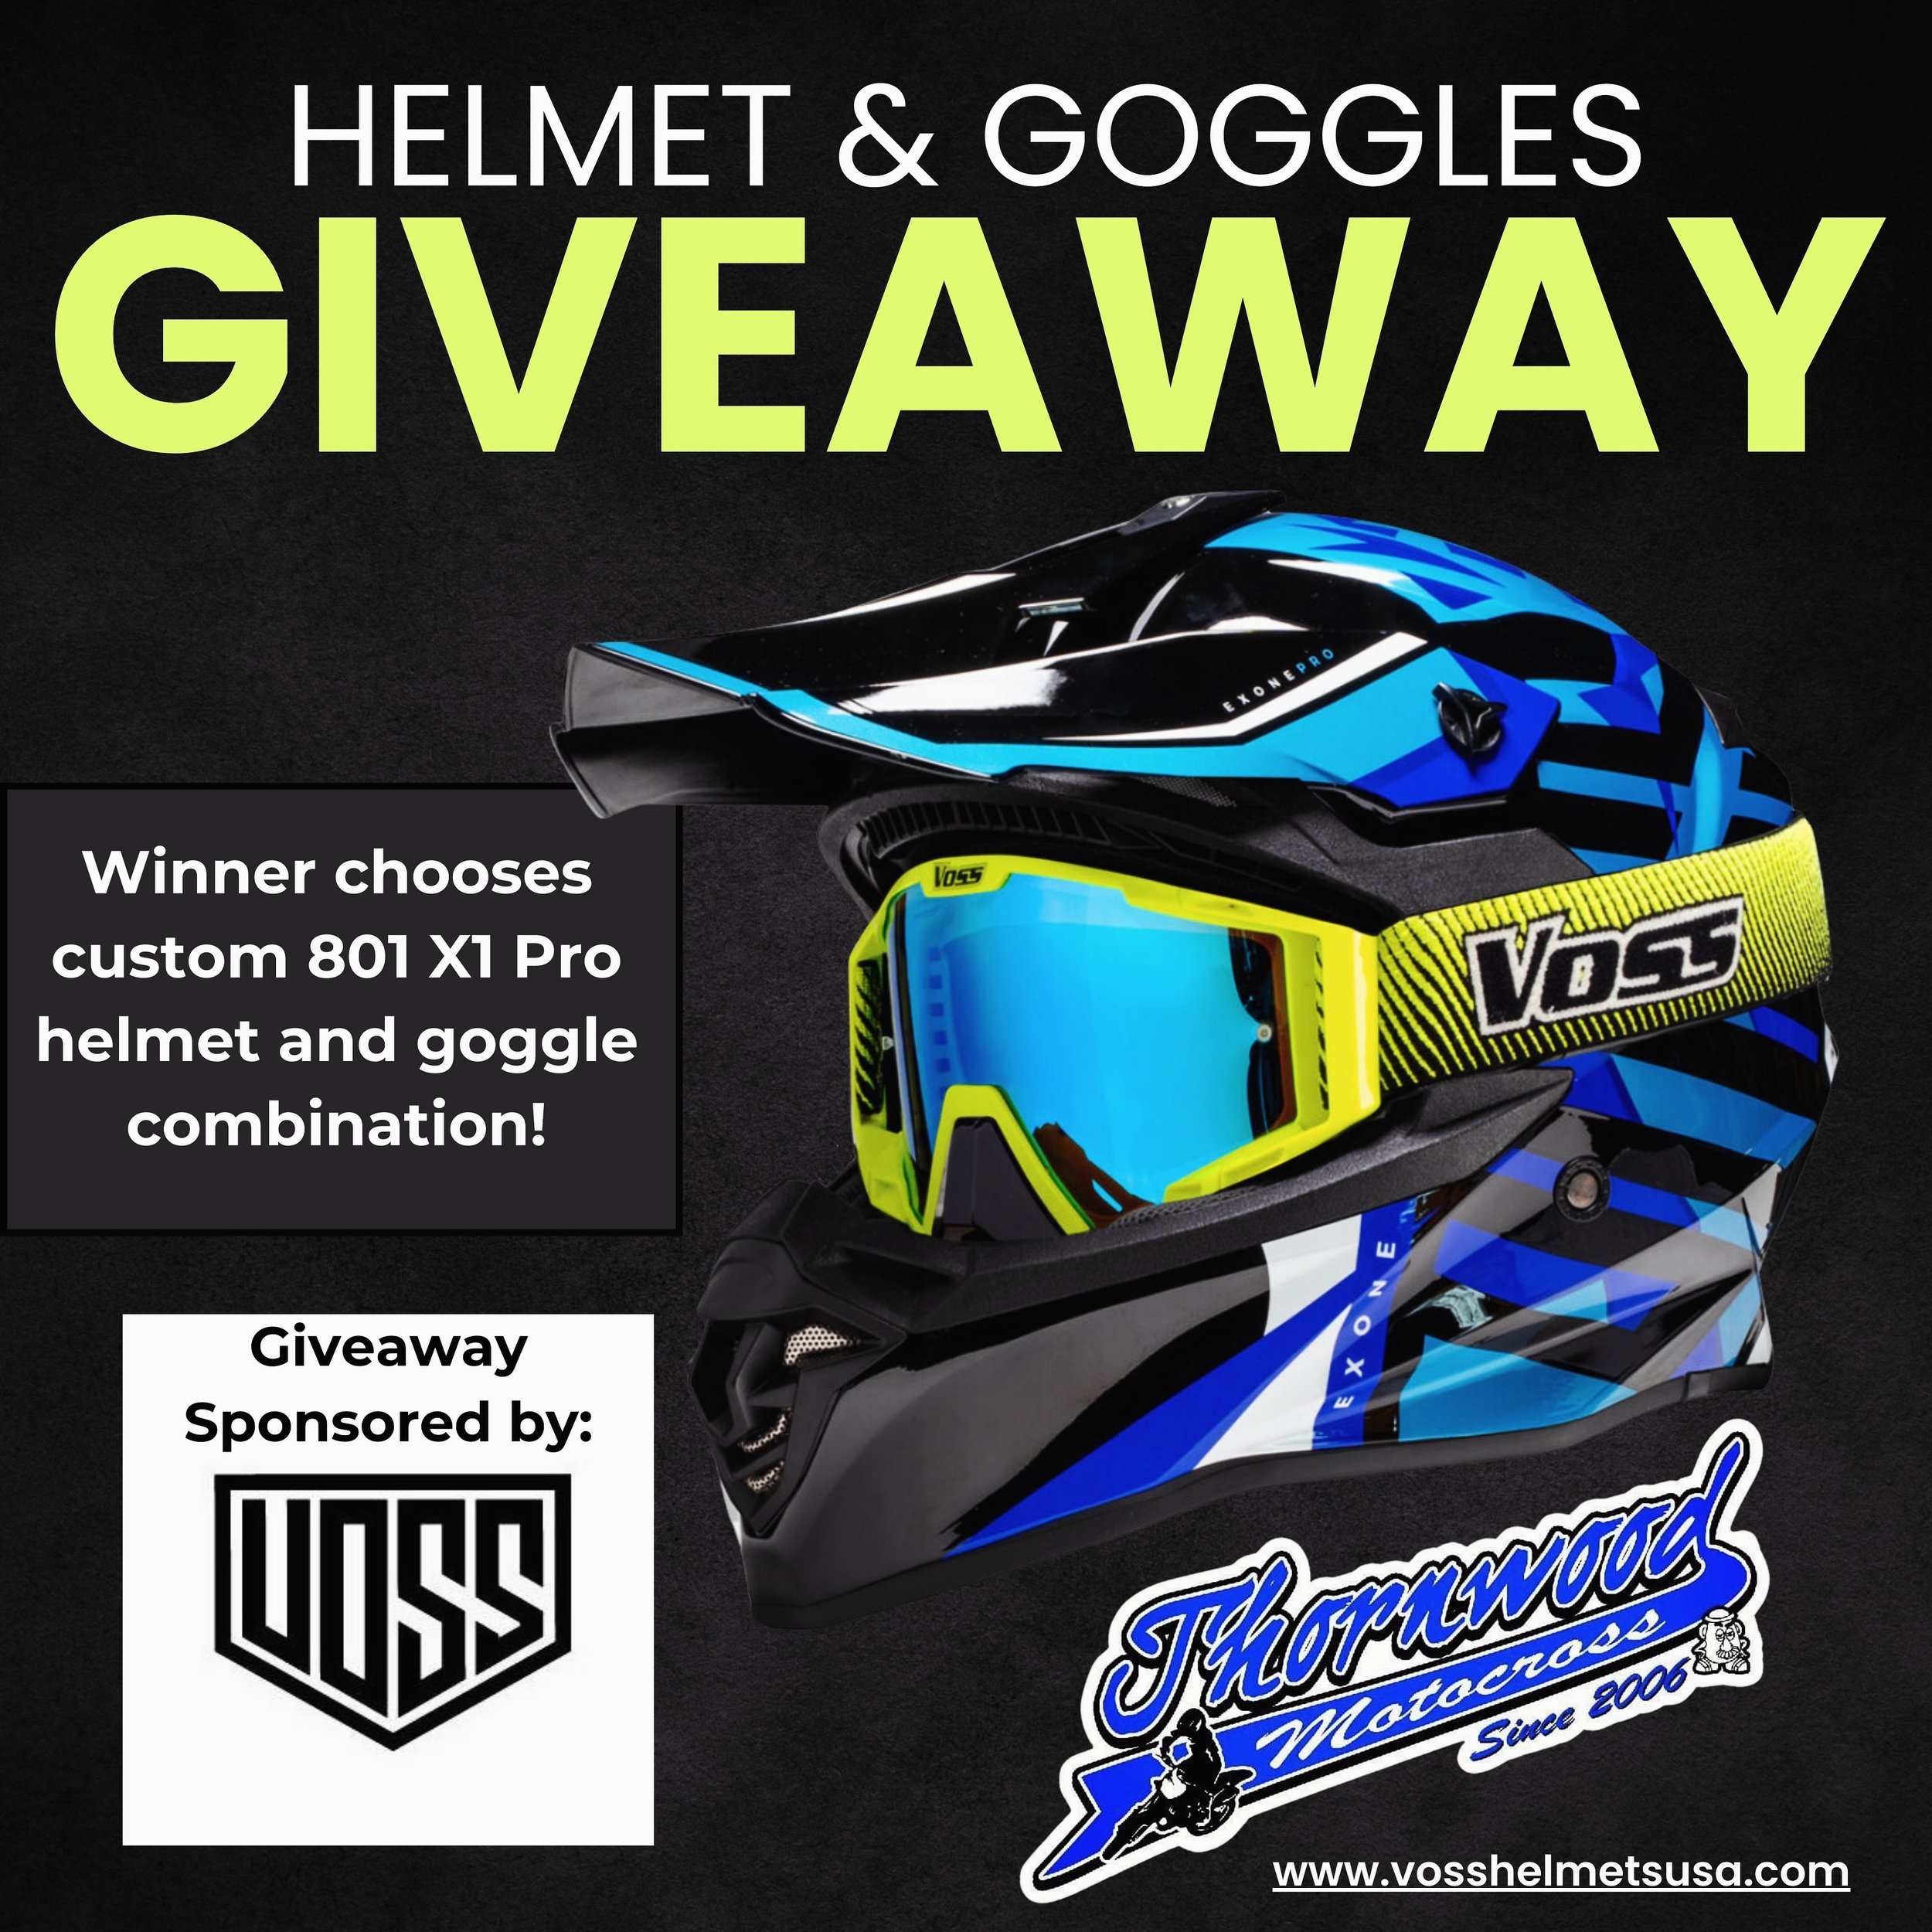 🎉 GIVEAWAY ALERT! 🎉&nbsp;

We&rsquo;ve teamed up with @vosshelmets to bring you an epic giveaway! 🏁 One lucky winner will snag an 801 X1 Pro Helmet AND a pair of Voss One MX Goggles!&nbsp;Winner picks their custom color combo!! 

To enter:⁣⁣⁣⁣⁣⁣⁣⁣